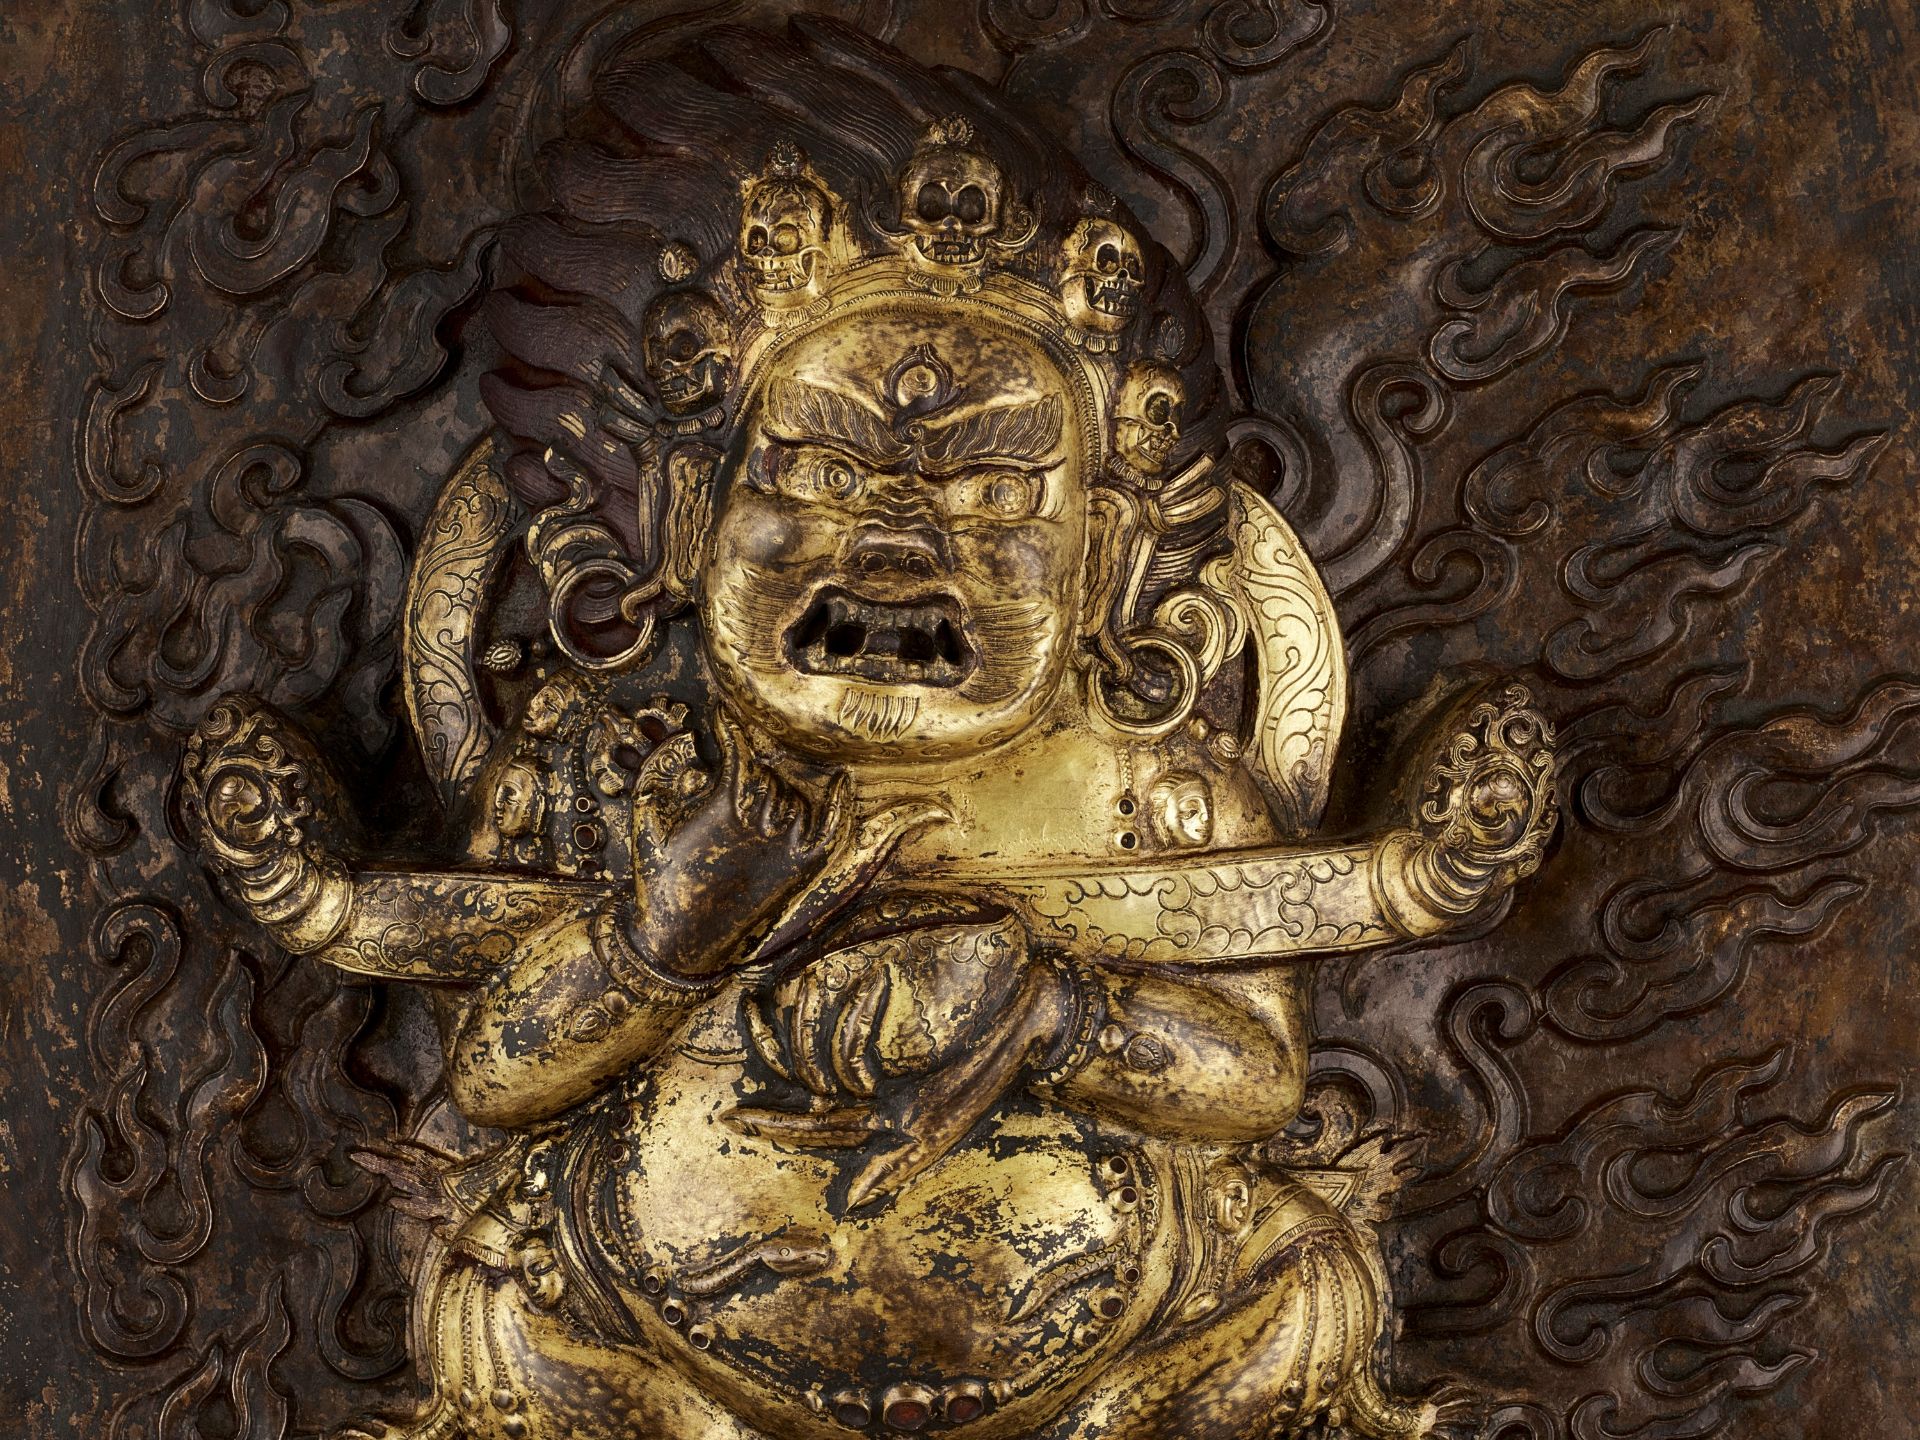 A LARGE GILT-COPPER REPOUSSE RELIEF OF MAHAKALA, 18TH-19TH CENTURY - Image 2 of 8